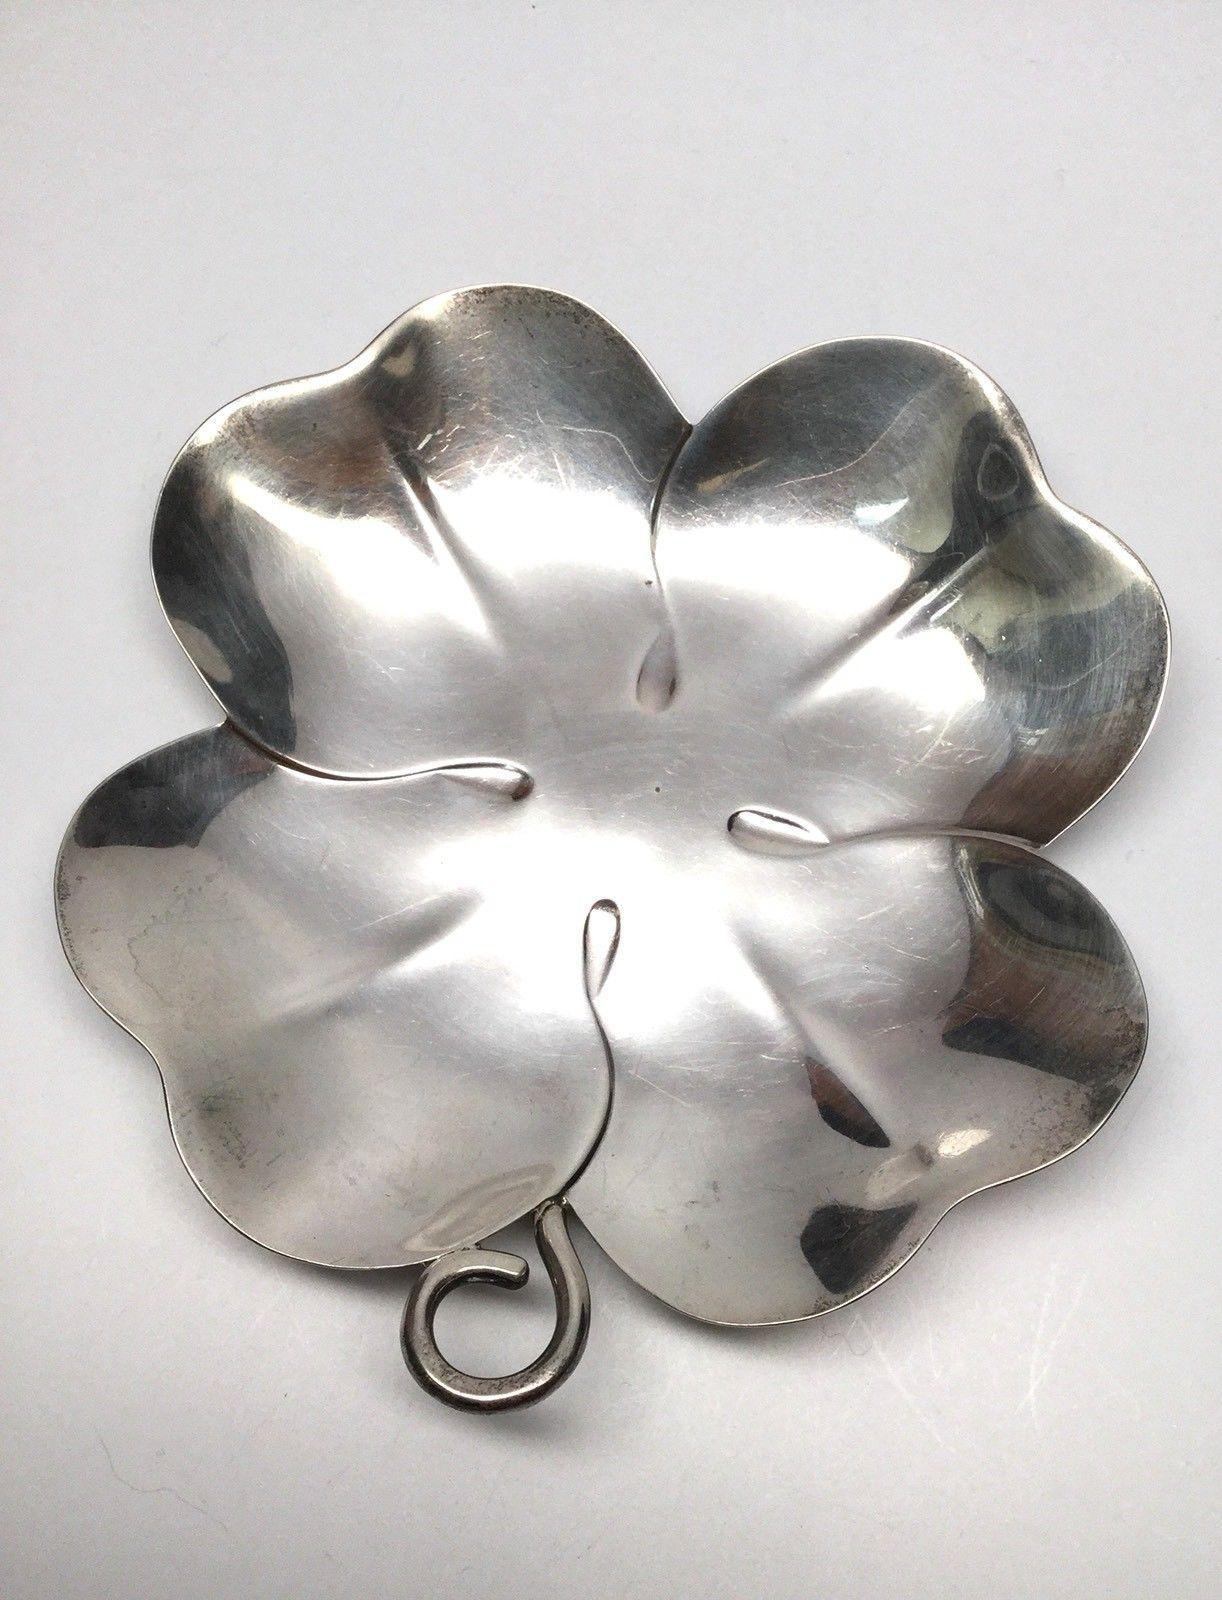 Tiffany & Co. sterling silver four leaf clover shamrock dish. This listing is for a lovely sterling silver four-leaf clover or shamrock shaped bowl/dish #23208 M made by Tiffany & Co. This bowl has a simple elegant design shamrock design.